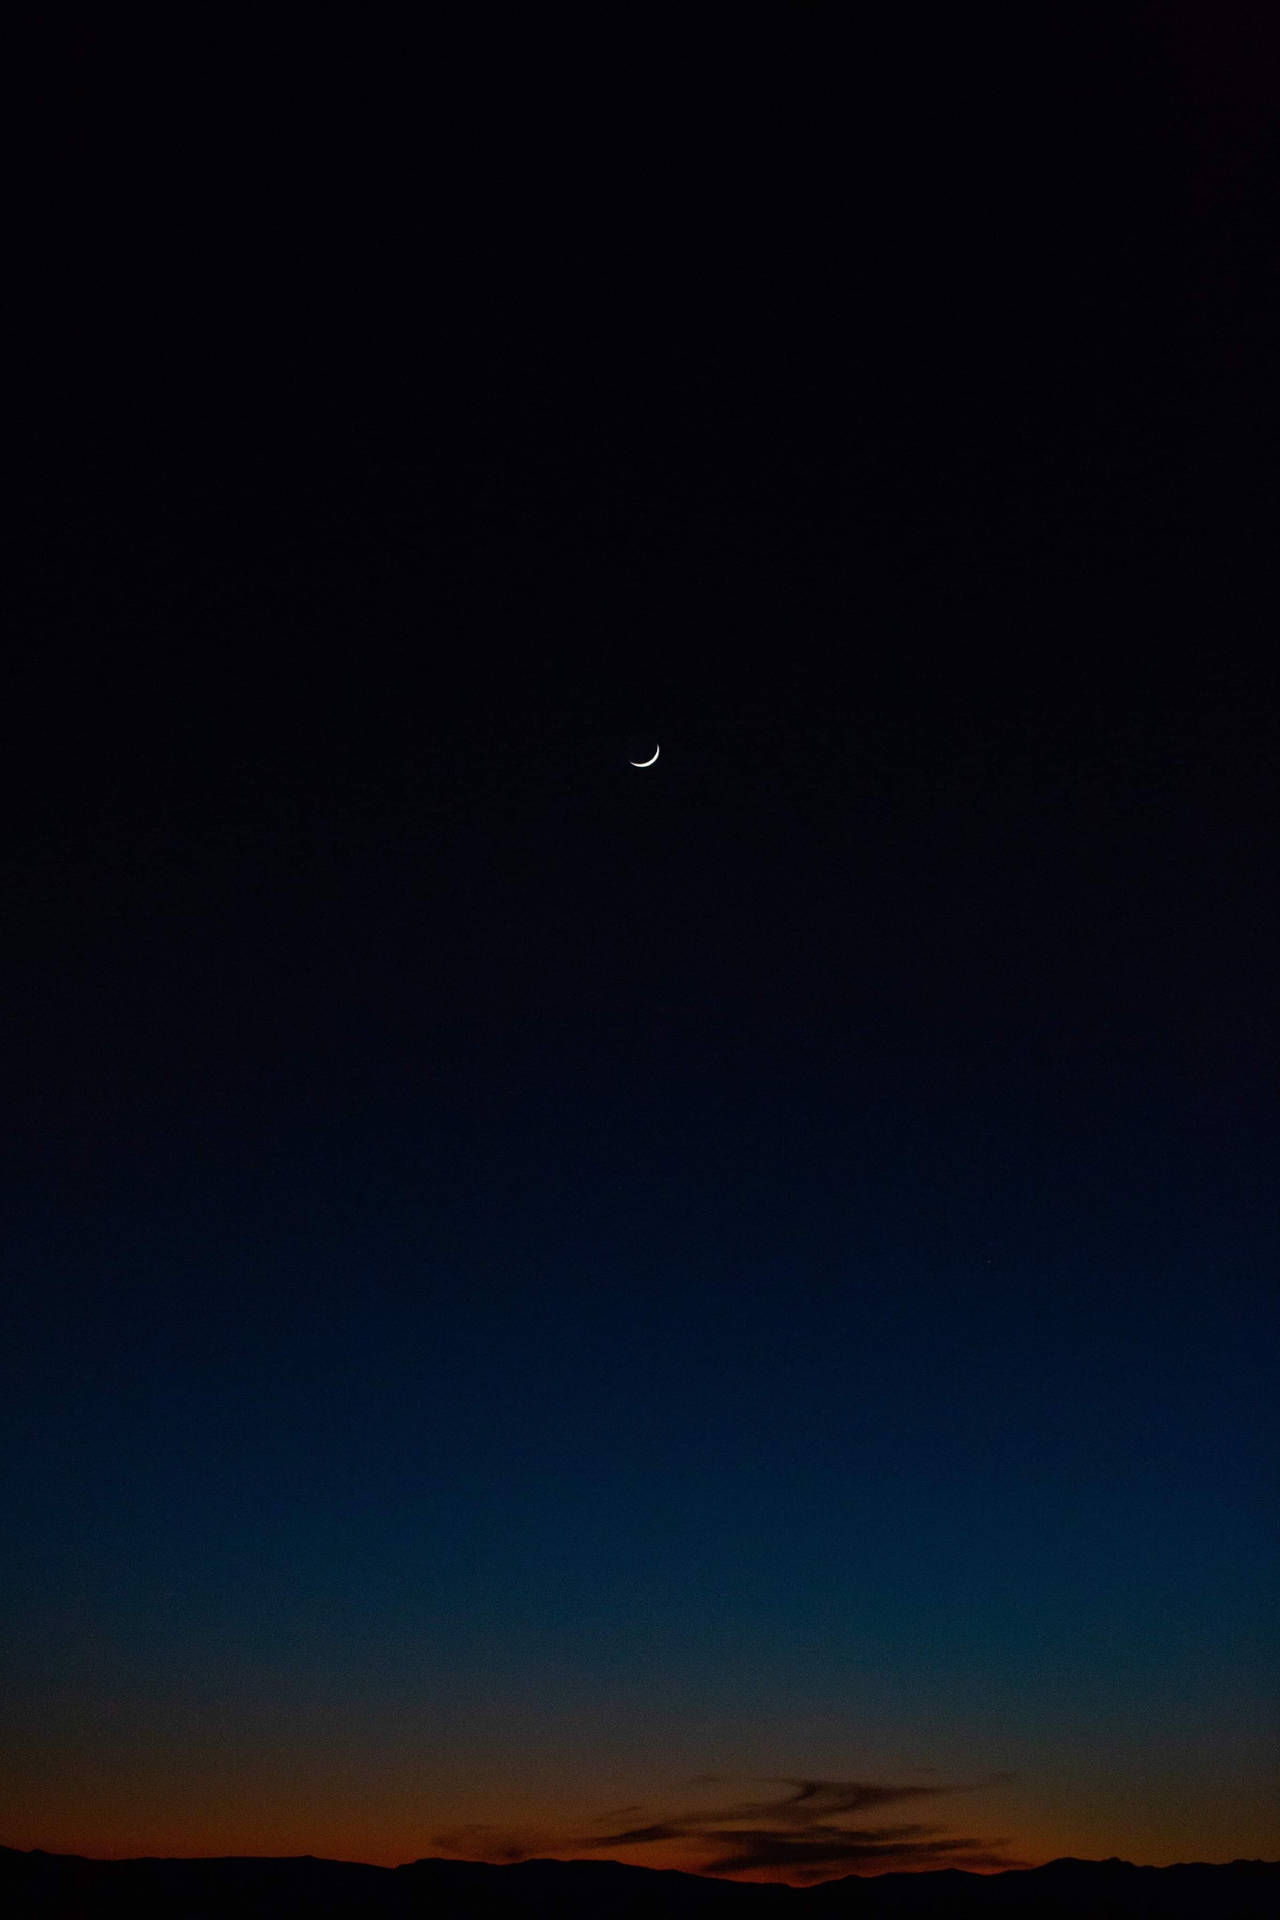 A Crescent Is Seen In The Sky Over A Desert Background